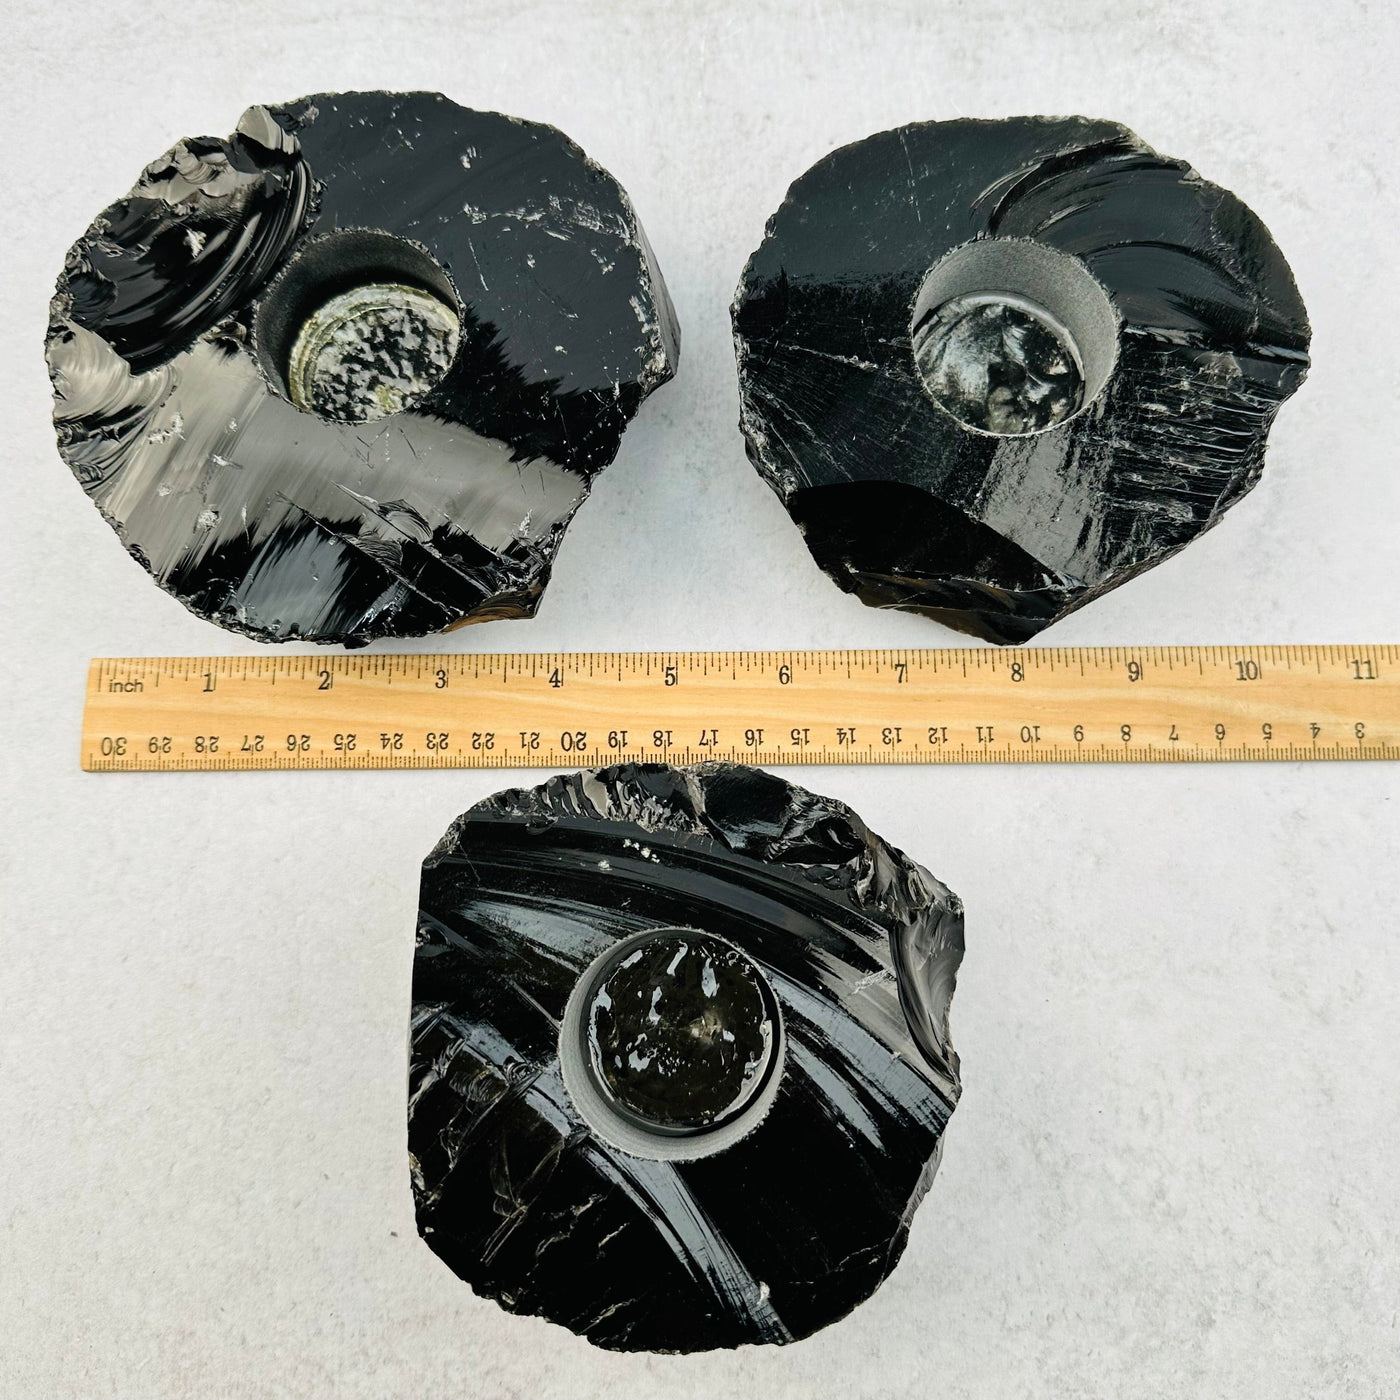 Obsidian Candle Holders next to a ruler for size reference 